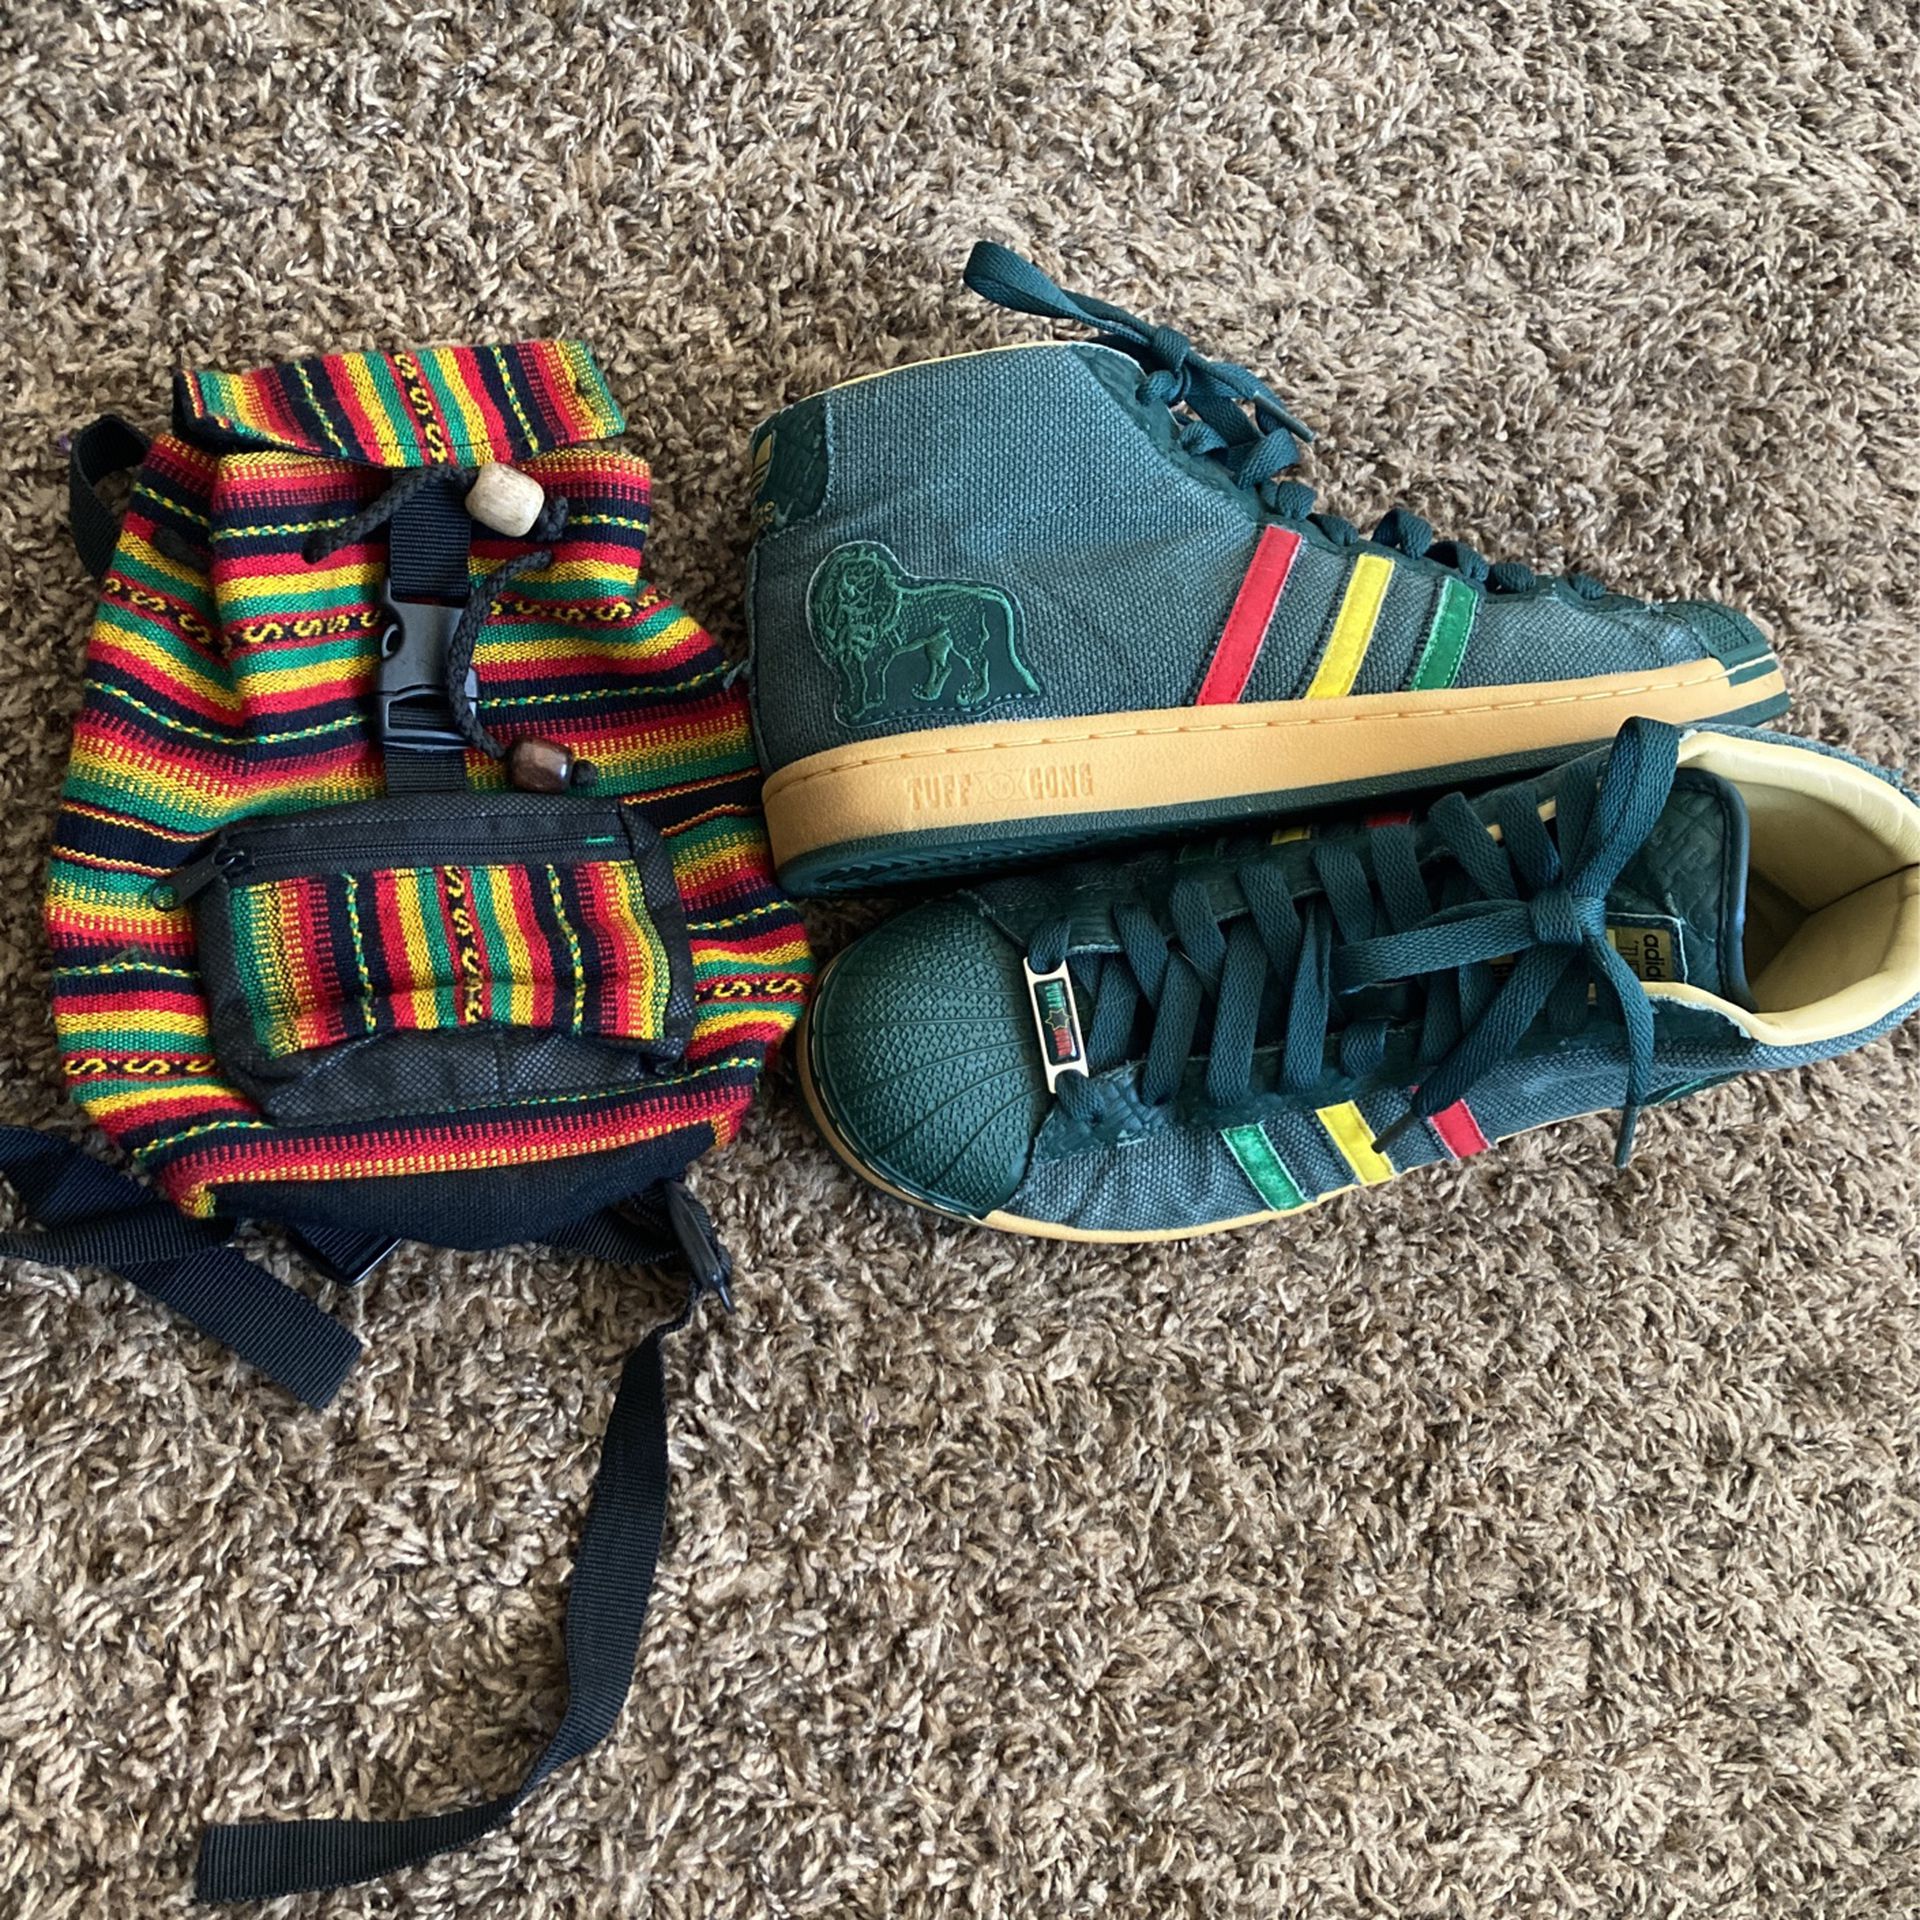 Tuff Adidas Size And Small Rasta Bag For 100 Bucks for Sale in Yucca Valley, CA -